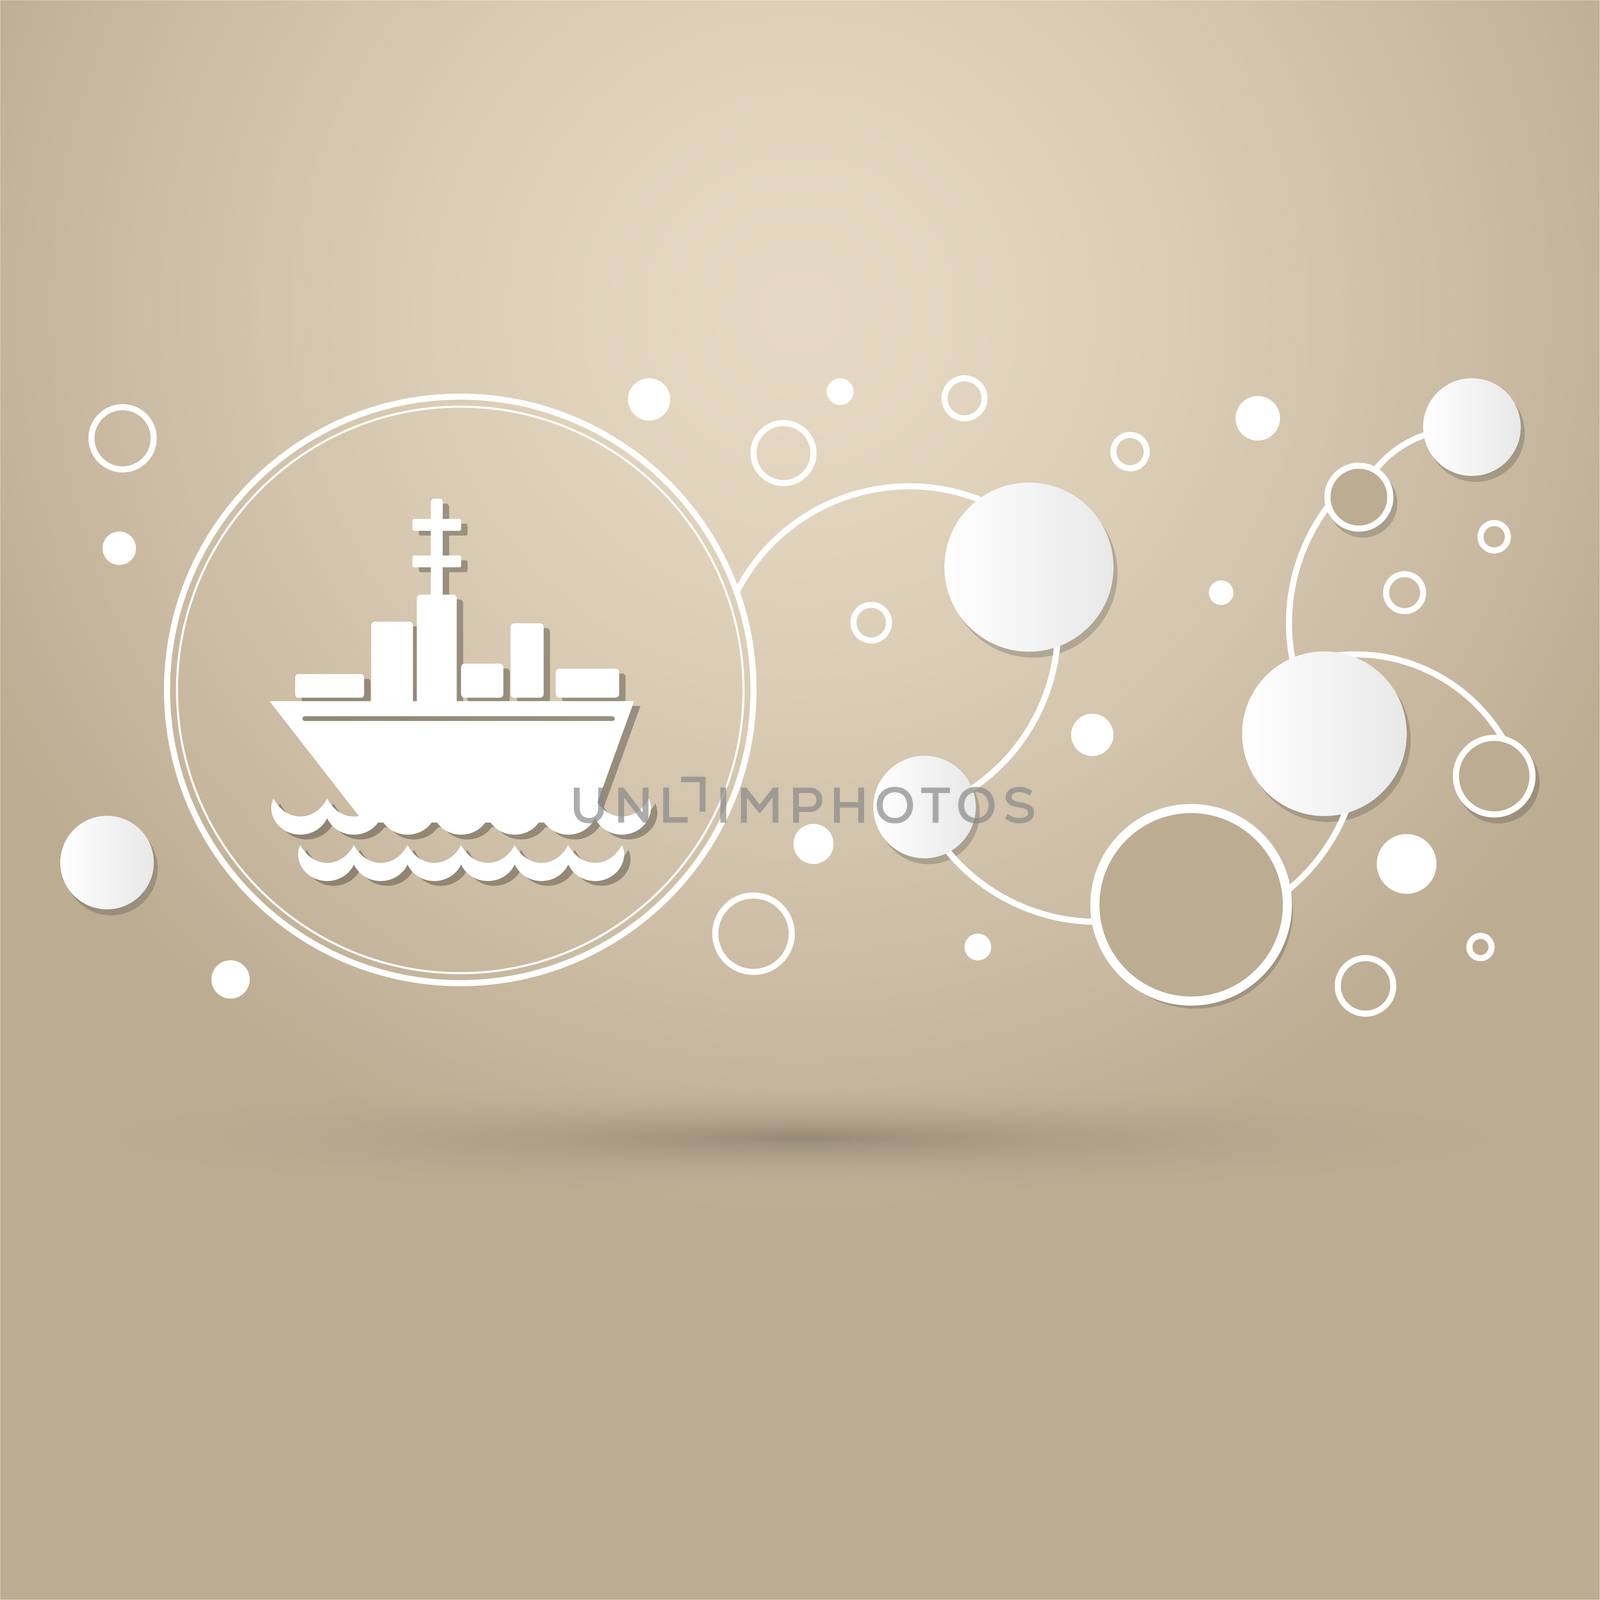 Ship boat icon on a brown background with elegant style and modern design infographic.  by Adamchuk